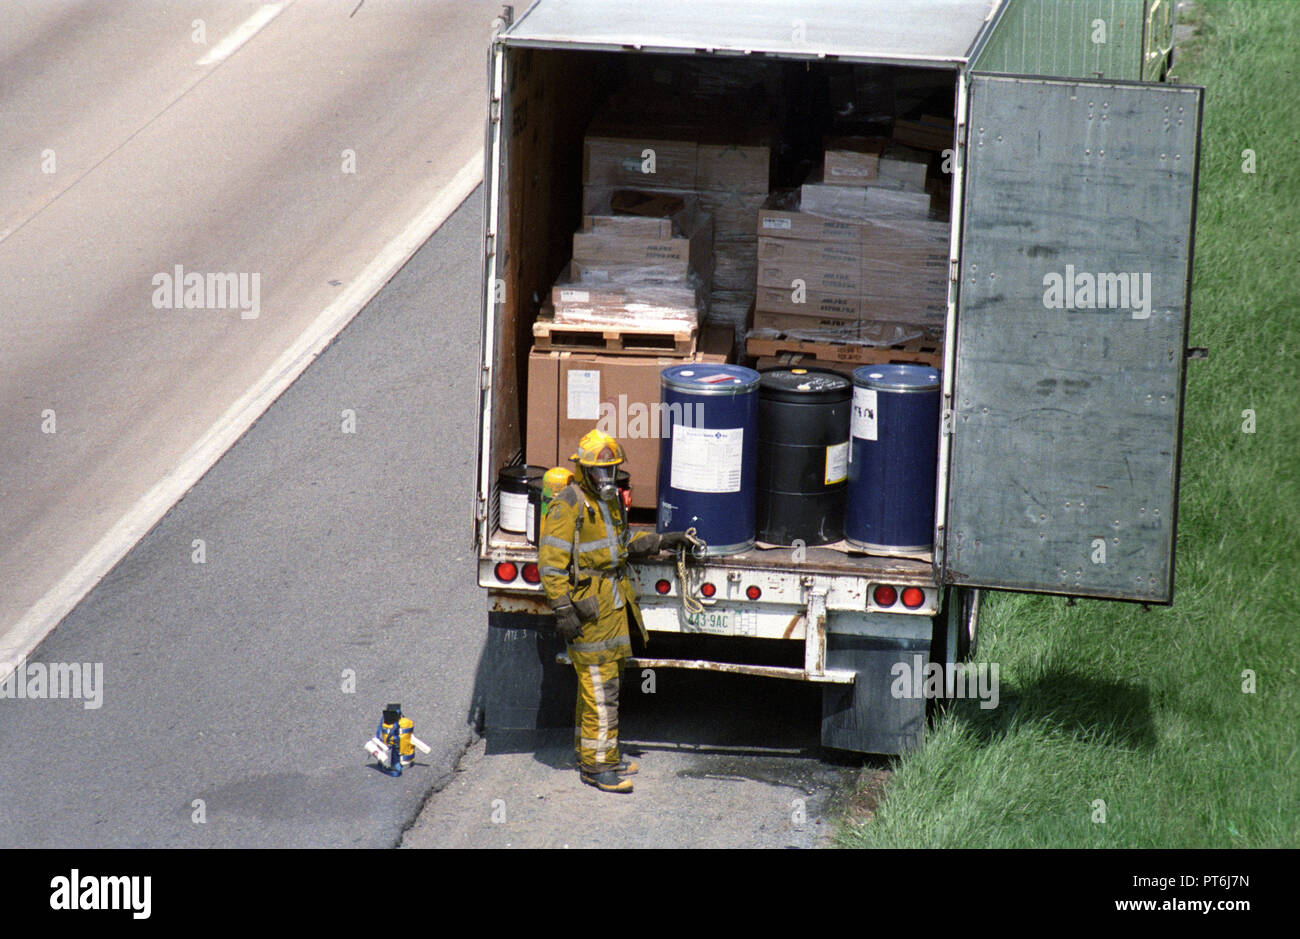 Firefighters examine hazardous cargo in the back of a tractor trailer on I95 in Beltsville, Md Stock Photo